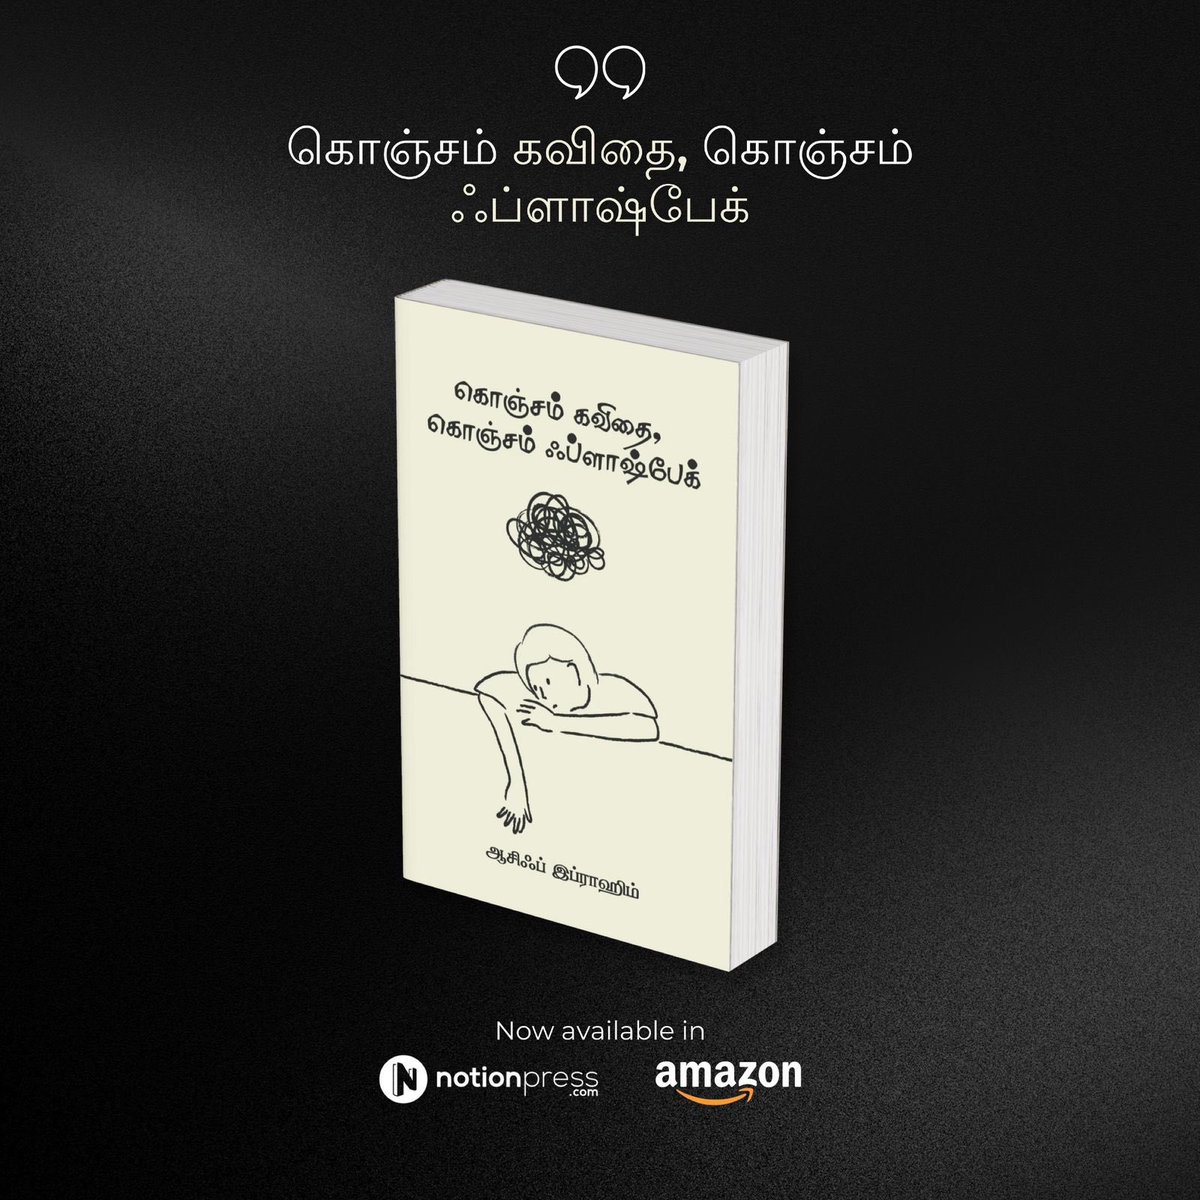 Congrats @thisis_asf !! Checkout his first book Konjam Kavithai, Konjam Flashback (Tamil). Please order your copies & have a read, You can order here: notionpress.com/read/konjam-ka…